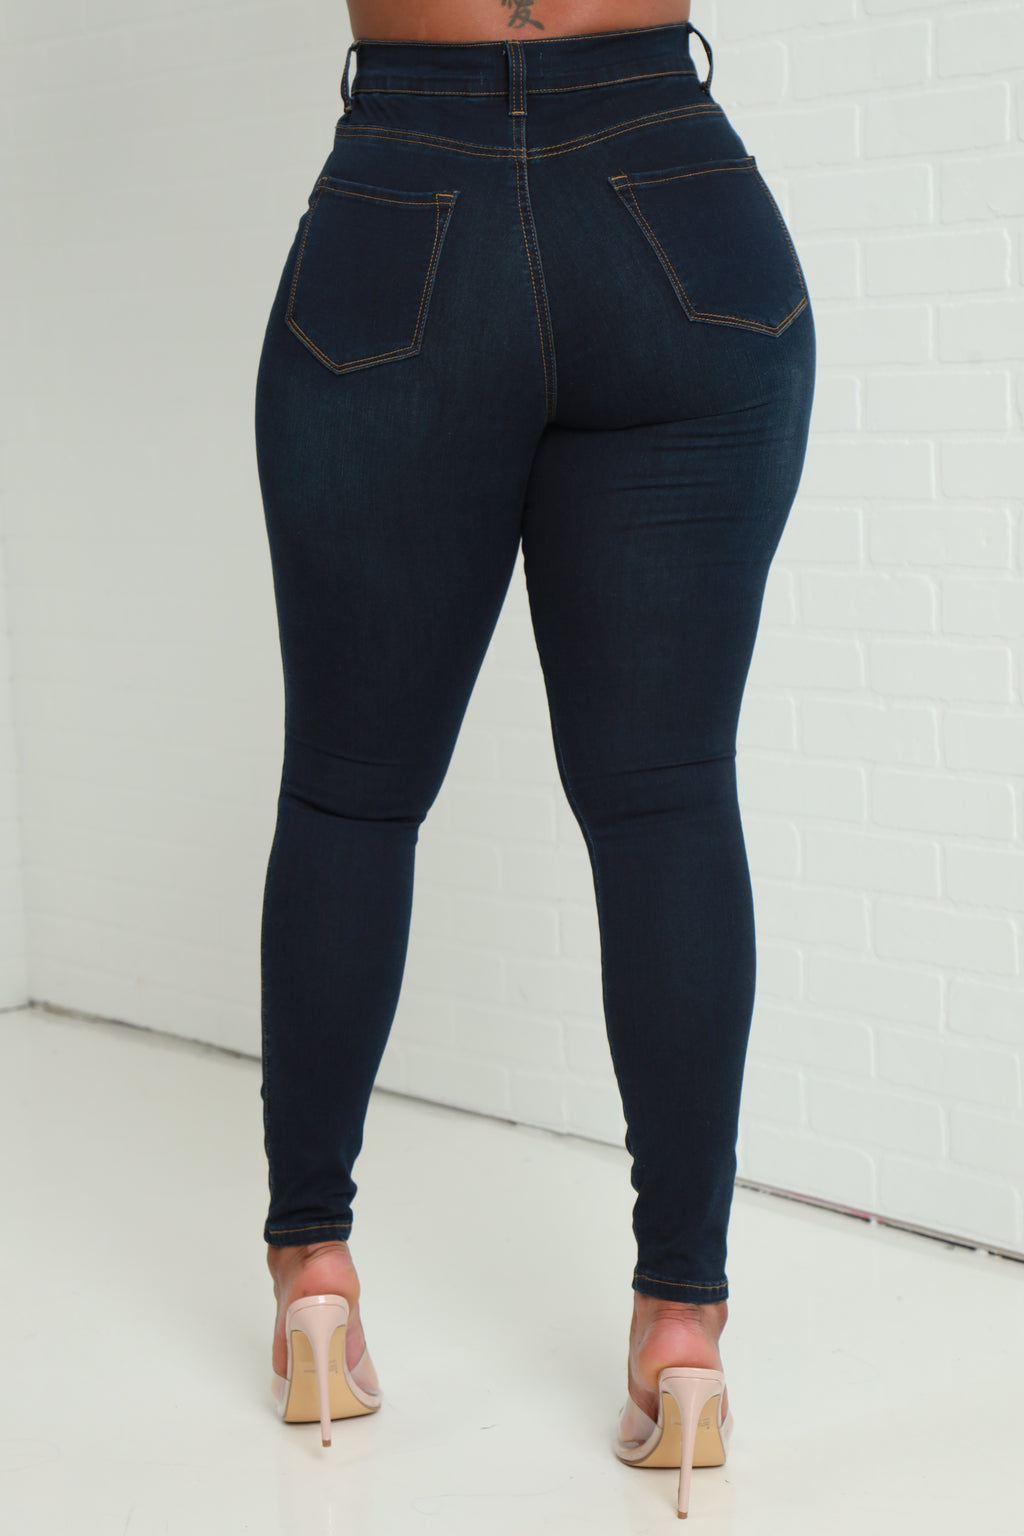 Every Morning Hourglass High Rise Stretchy Jeans - Dark Wash